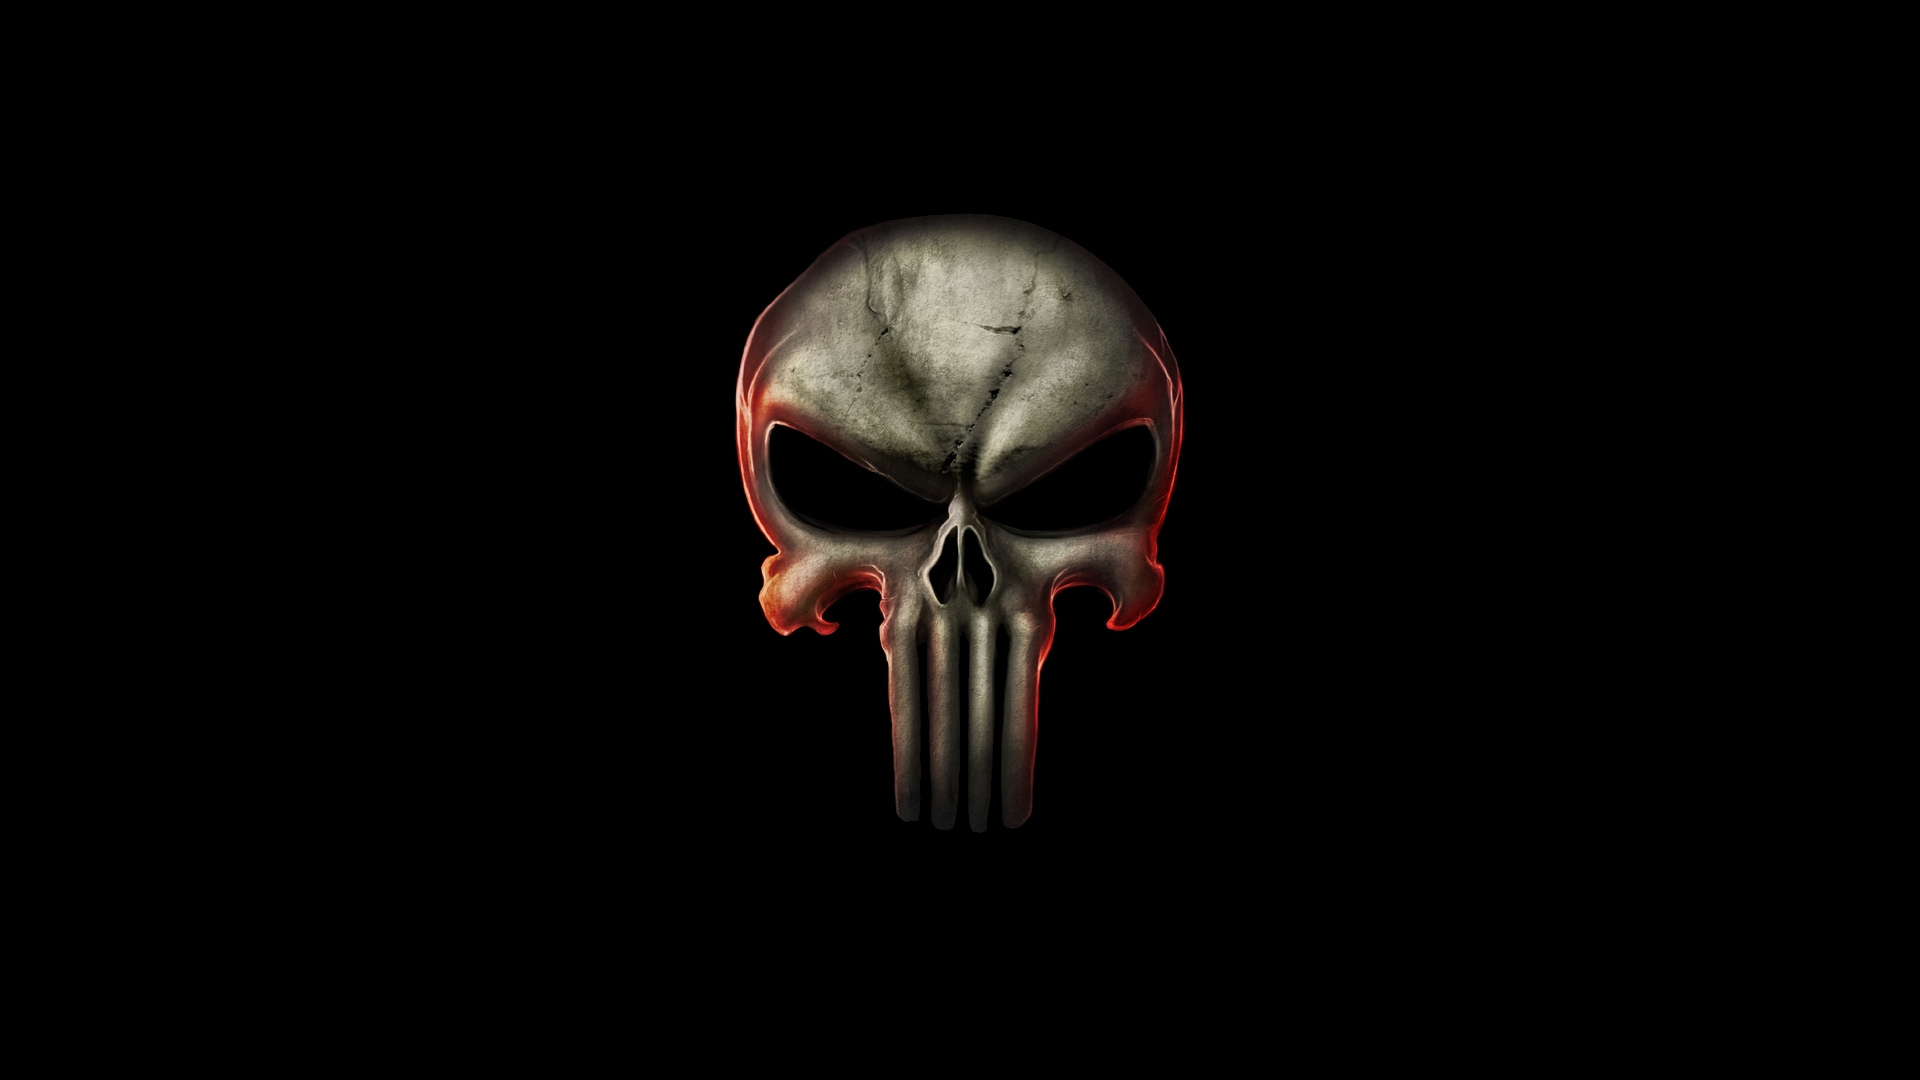 The Punisher Computer Wallpapers Desktop Backgrounds 1920x1080 ID 1920x1080